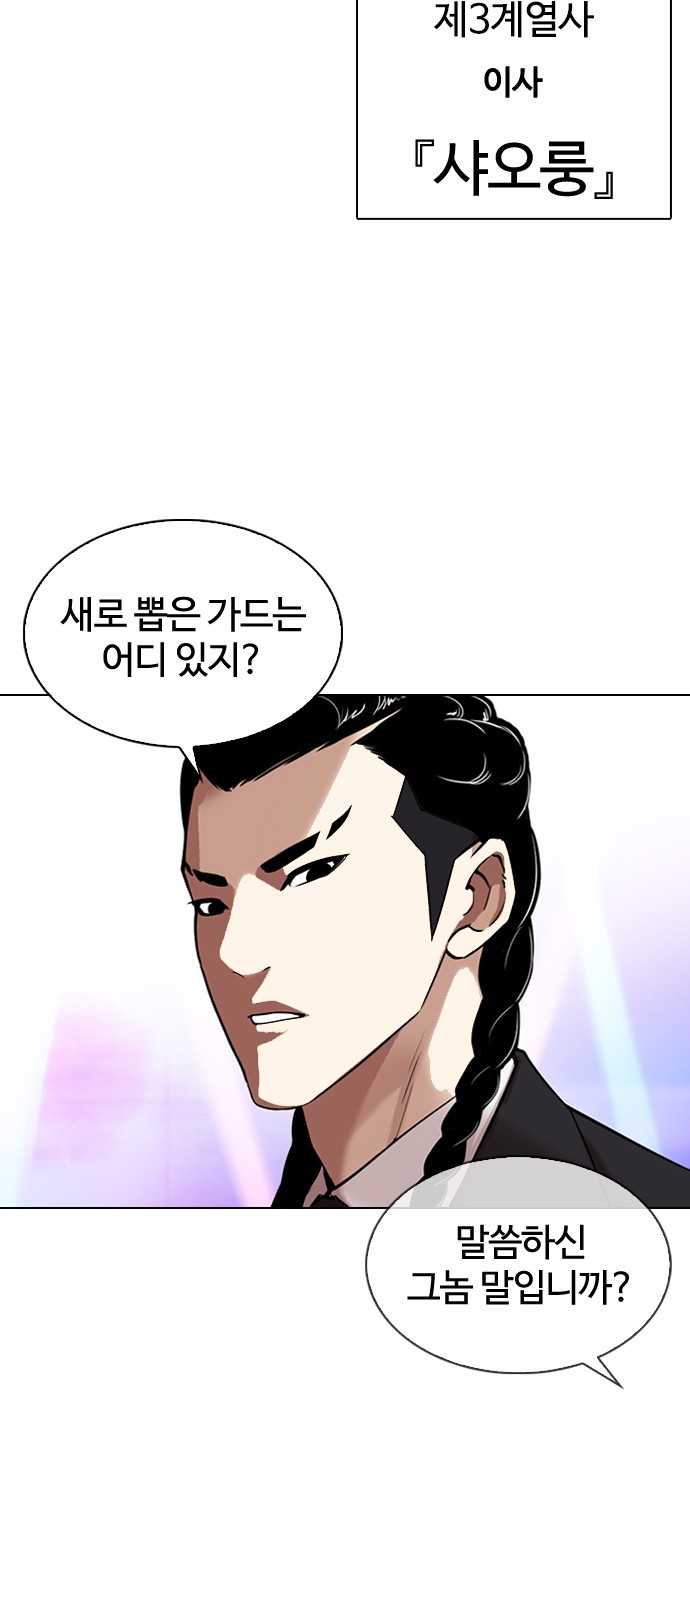 Lookism - Chapter 337 - Page 4